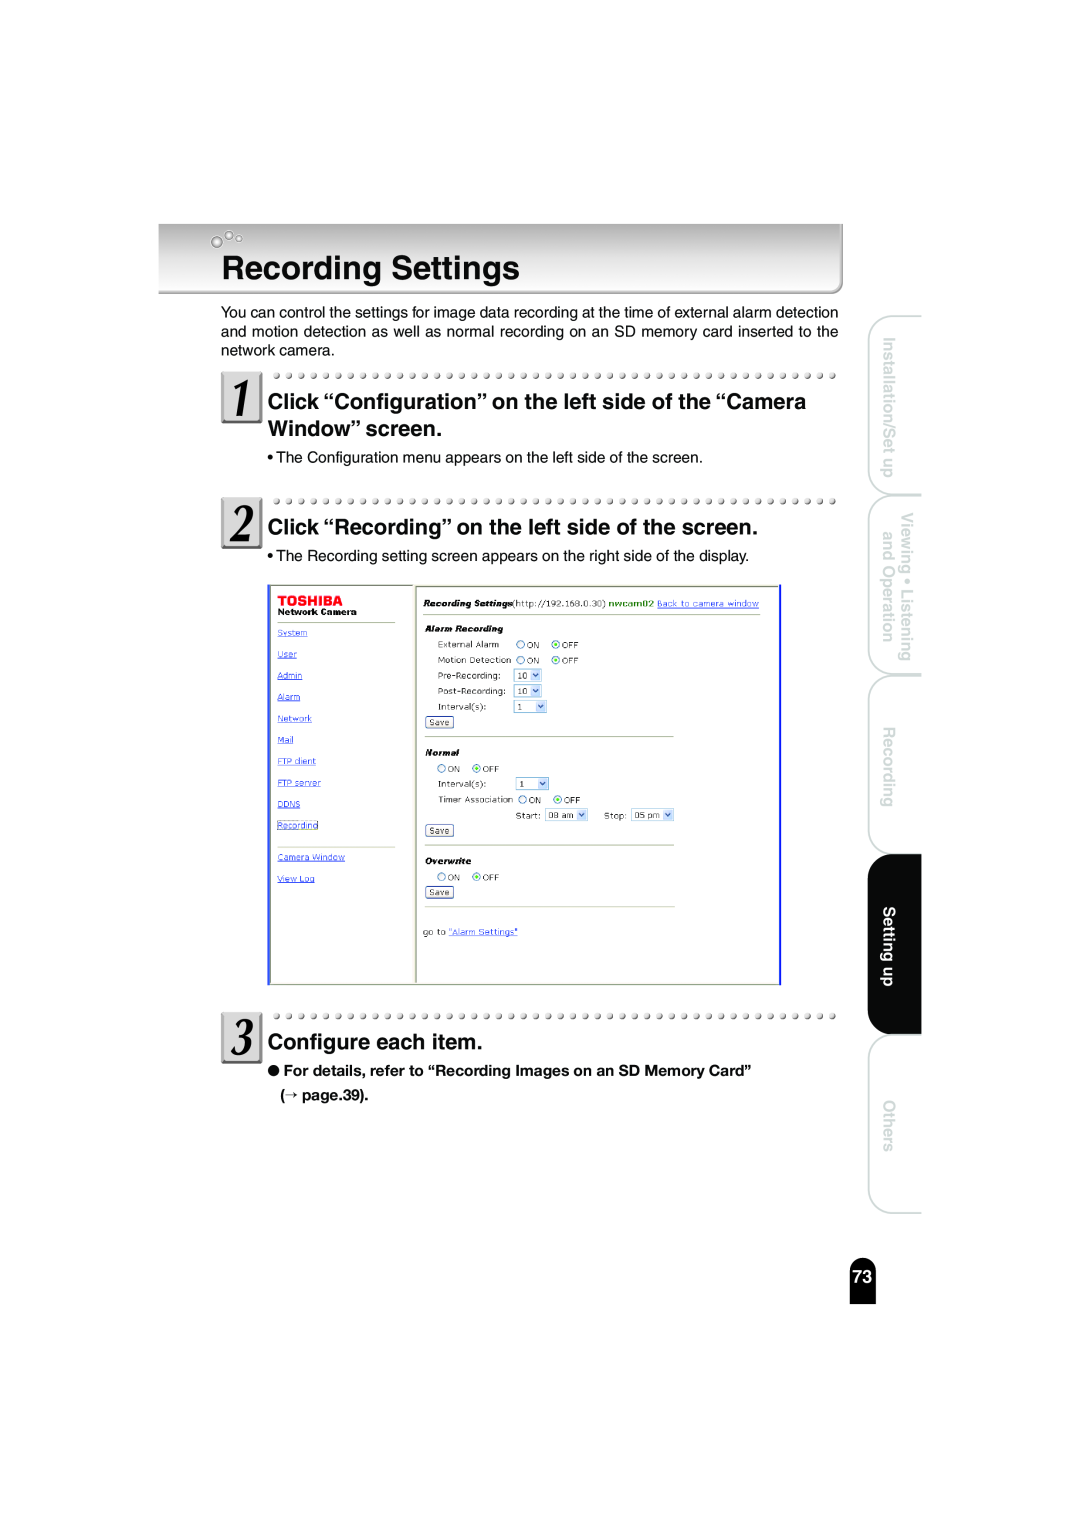 Toshiba IK-WB02A Recording Settings, Click “Recording” on the left side of the screen, Configure each item, Setting up 